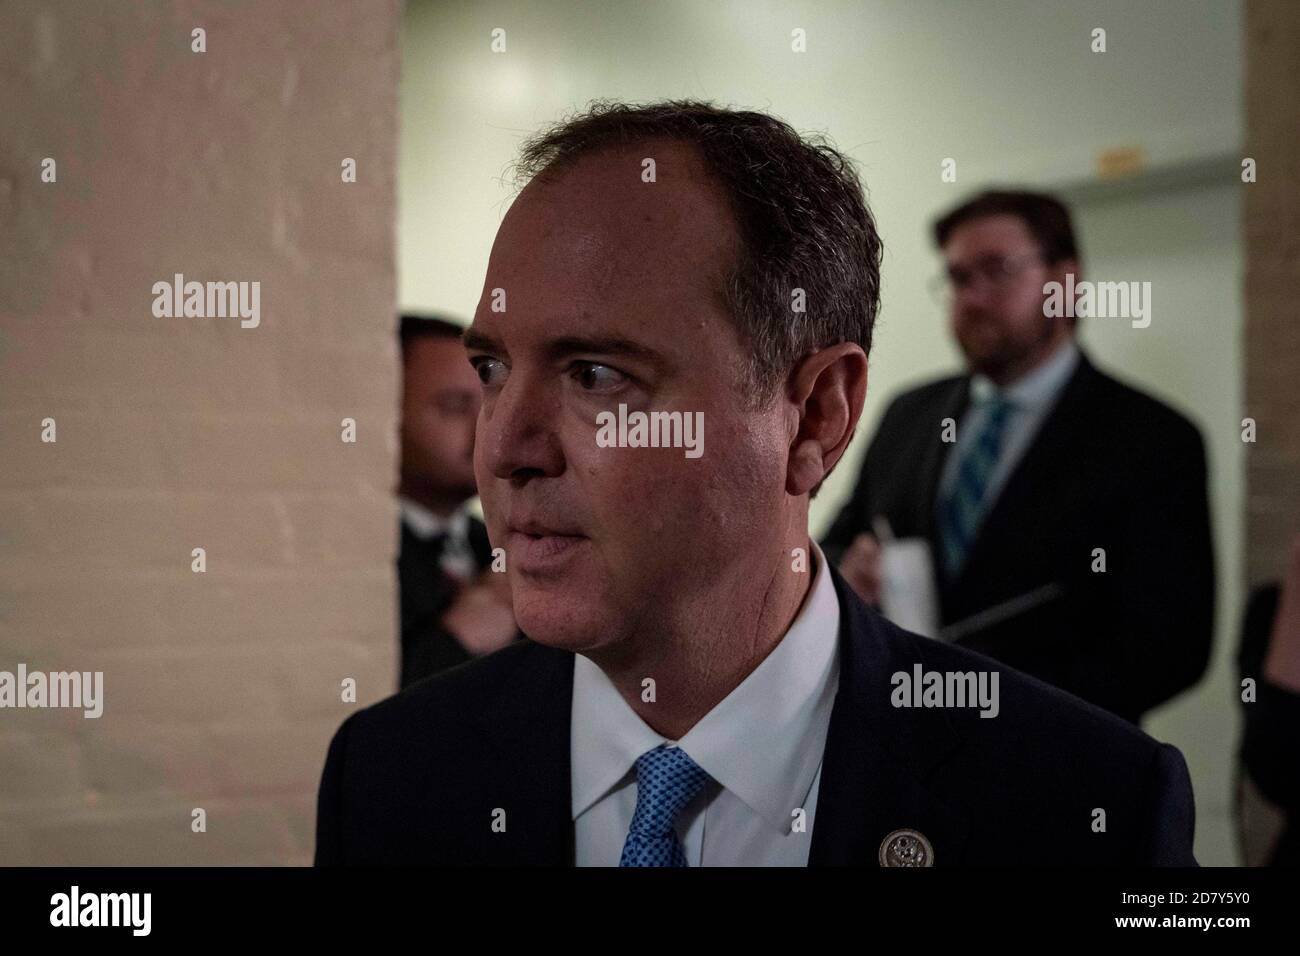 Representative Adam Schiff, Democrat of California and Chairmen of the House Intelligence committee, enters a Democratic caucus meeting at the U.S. Capitol in Washington, D.C. on May 22, 2019. Credit: Alex Edelman/The Photo Access Stock Photo